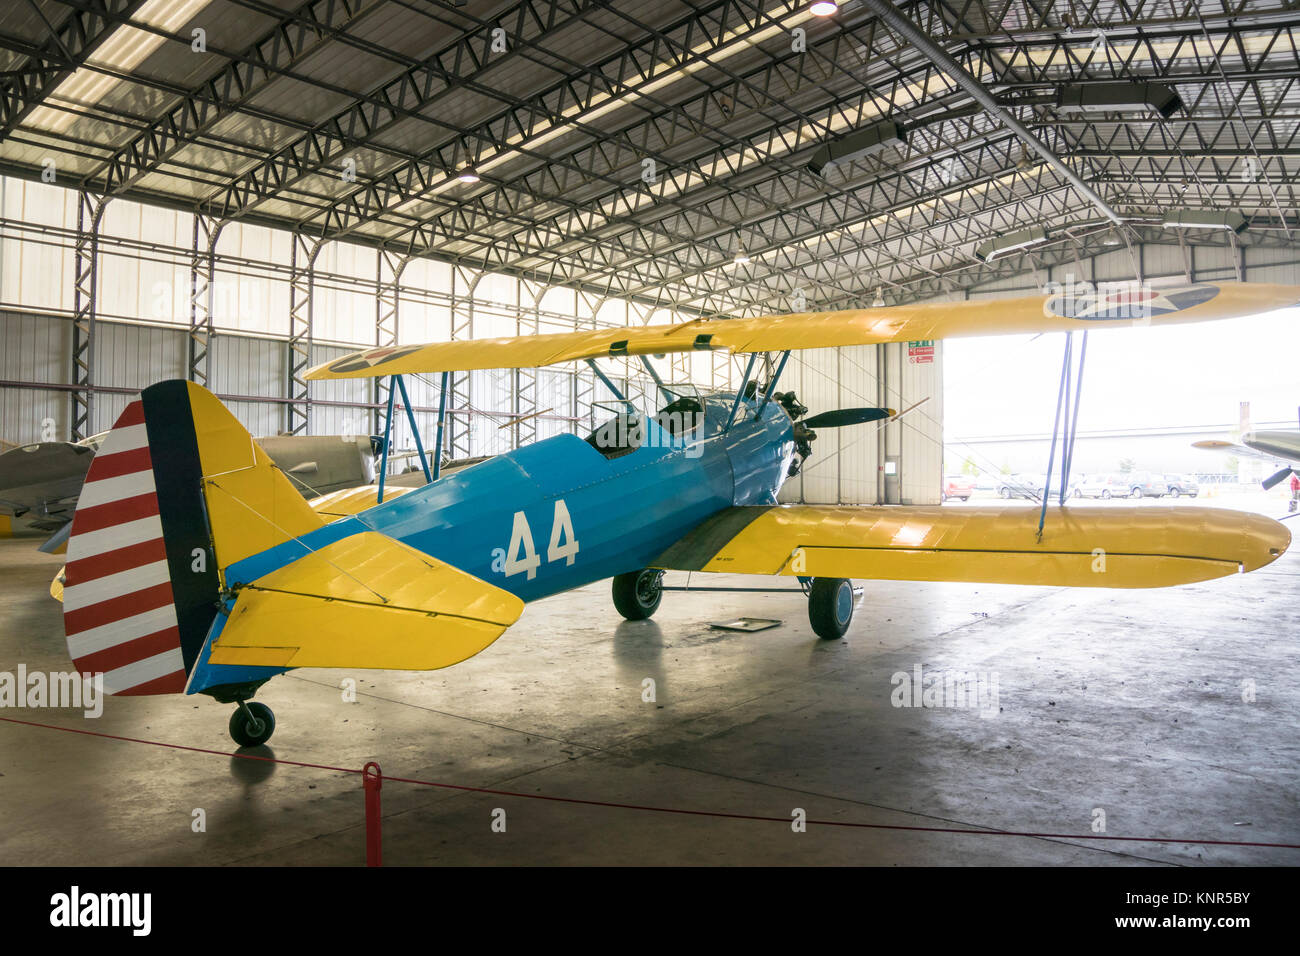 Boeing Stearman PT-17 Kaydet aircraft in the hangar at the Imperial War Museum, Duxford, England, UK Stock Photo